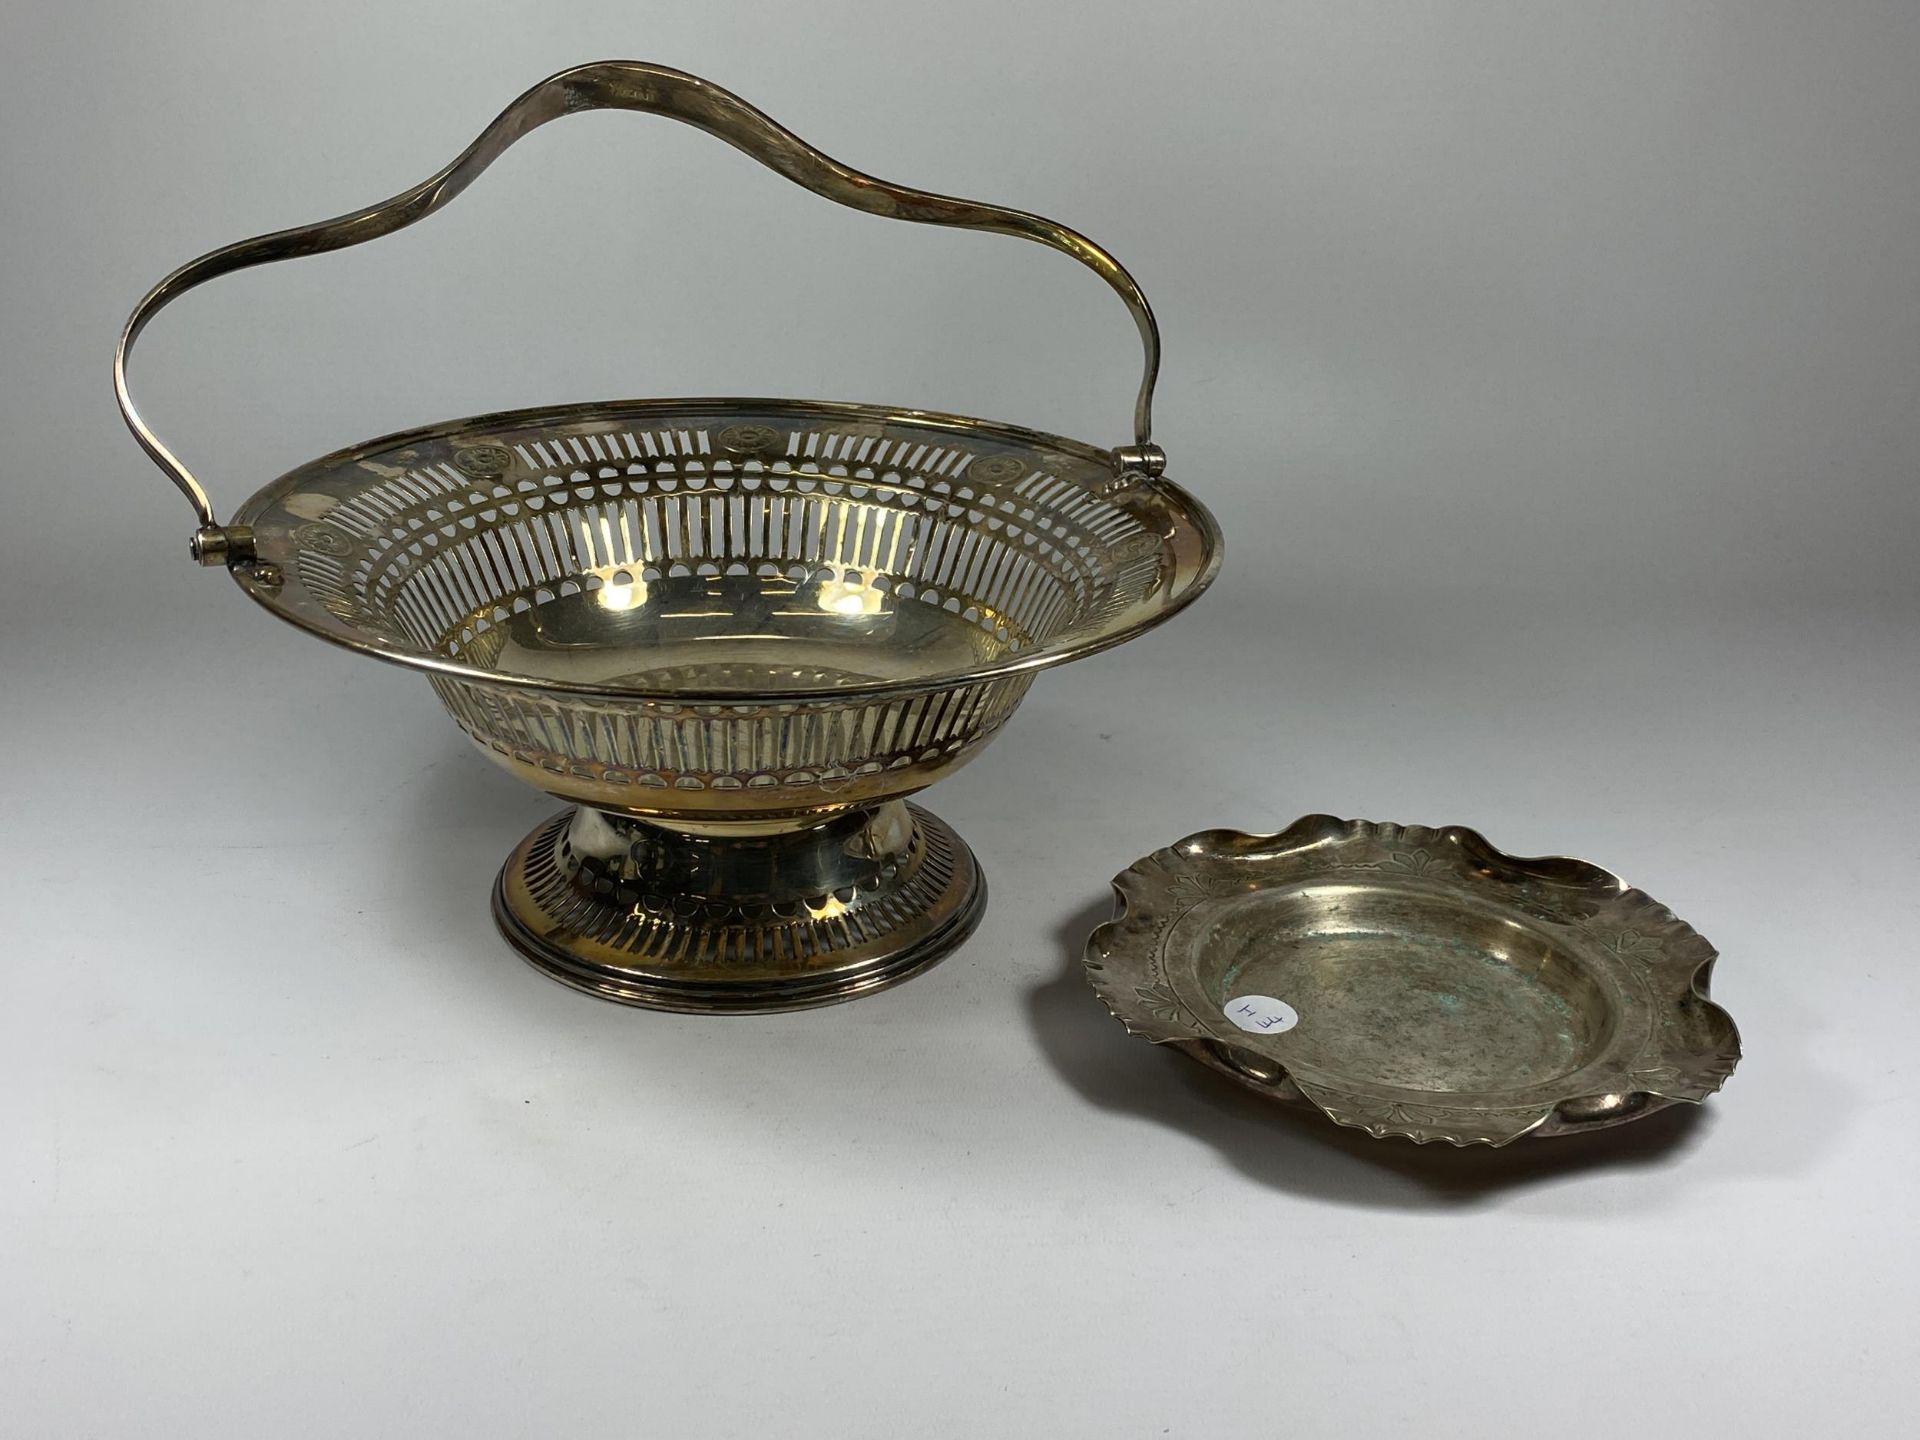 TWO VINTAGE SILVER PLATED ITEMS - PEDESTAL BOWL WITH PIERCED GALLERY DESIGN AND SMALLER DISH